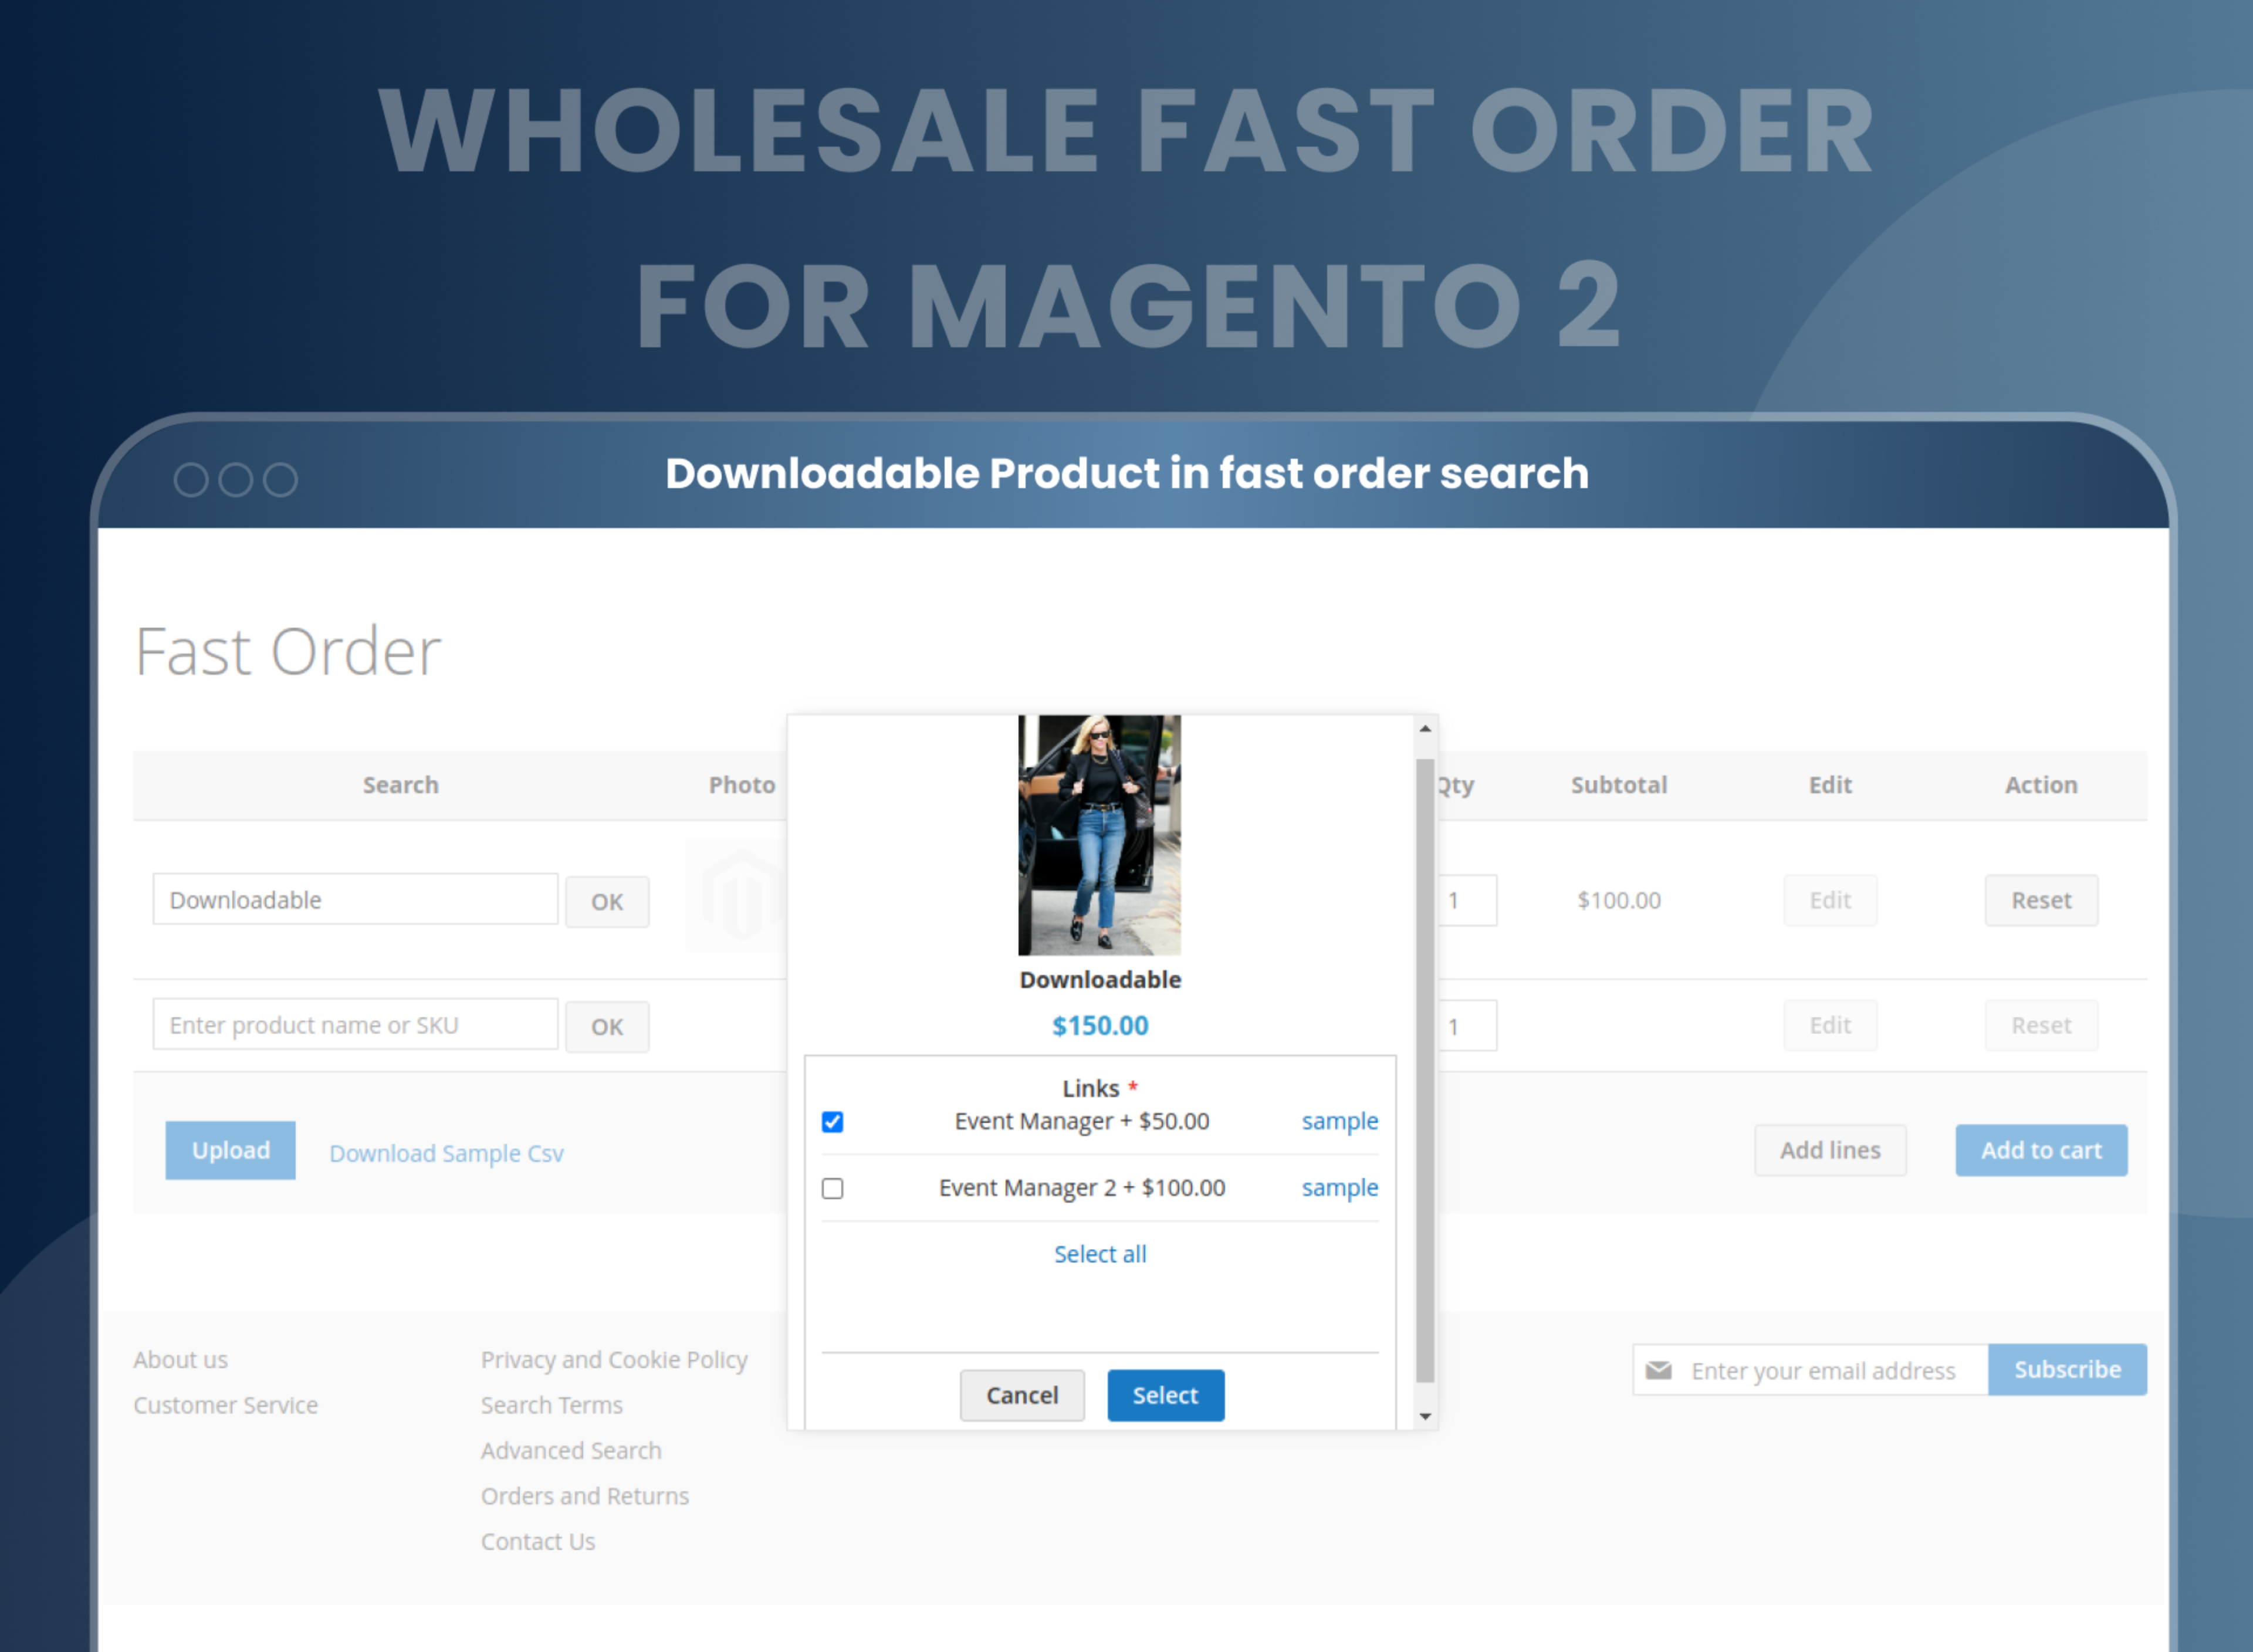 Downloadable Product in fast order search